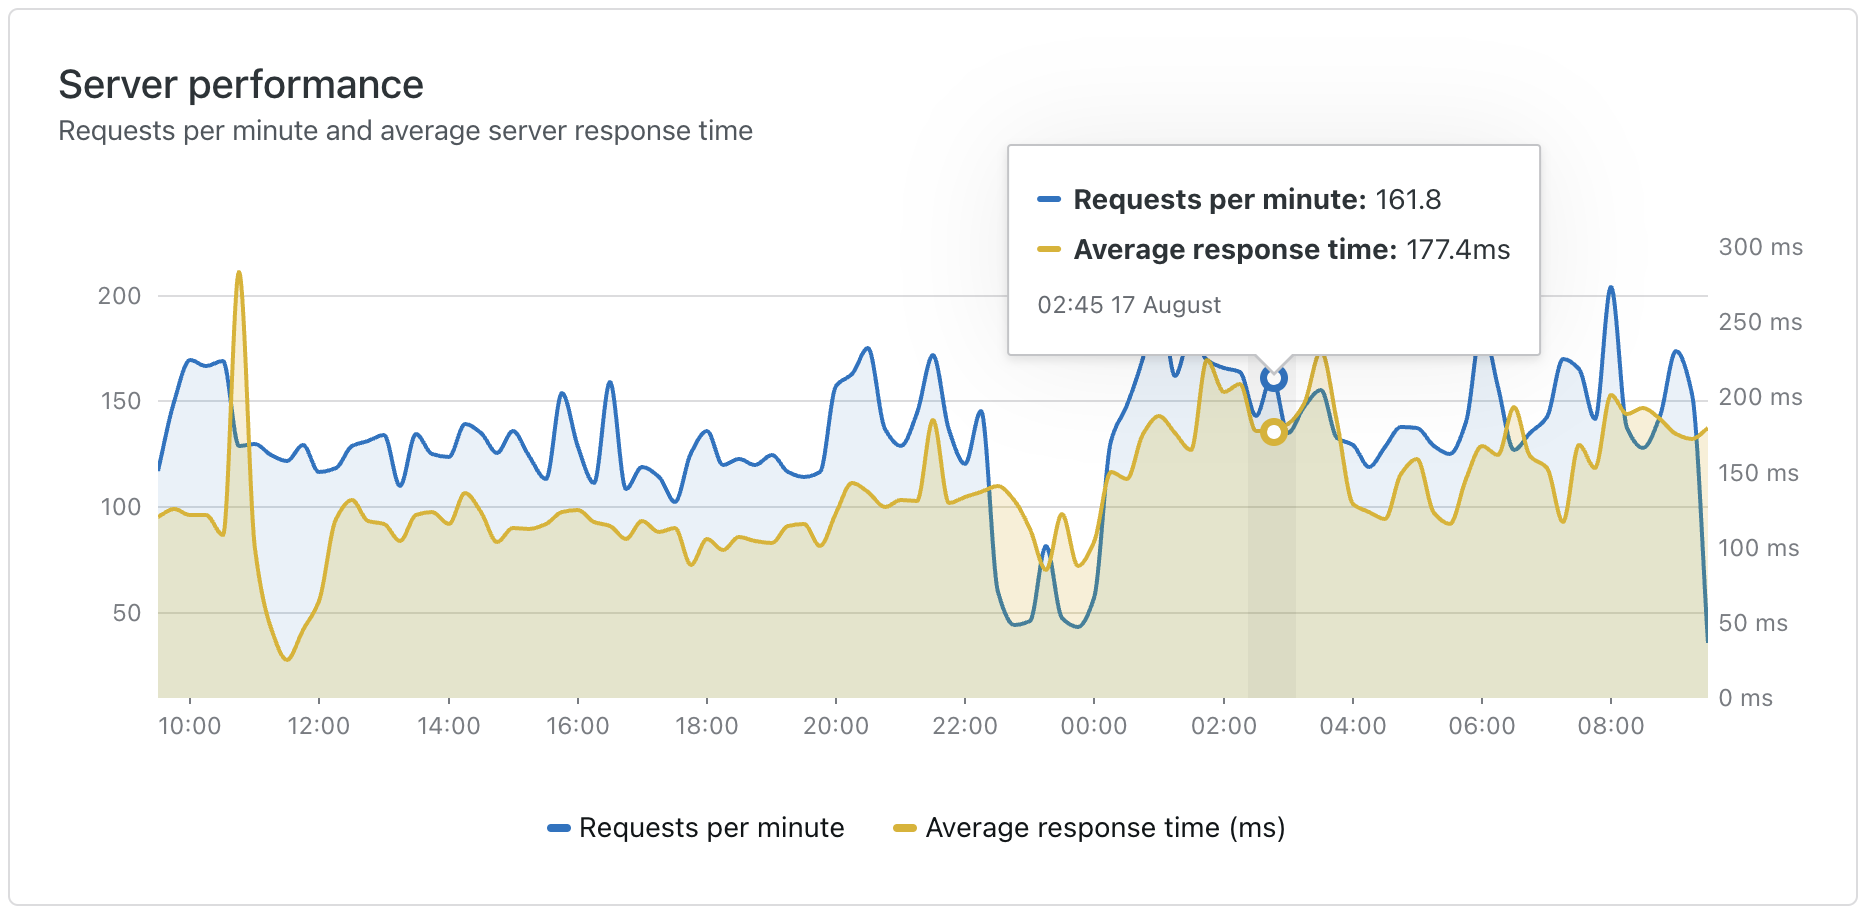 Image of a line graph showing server performance requests per min and average server response time.